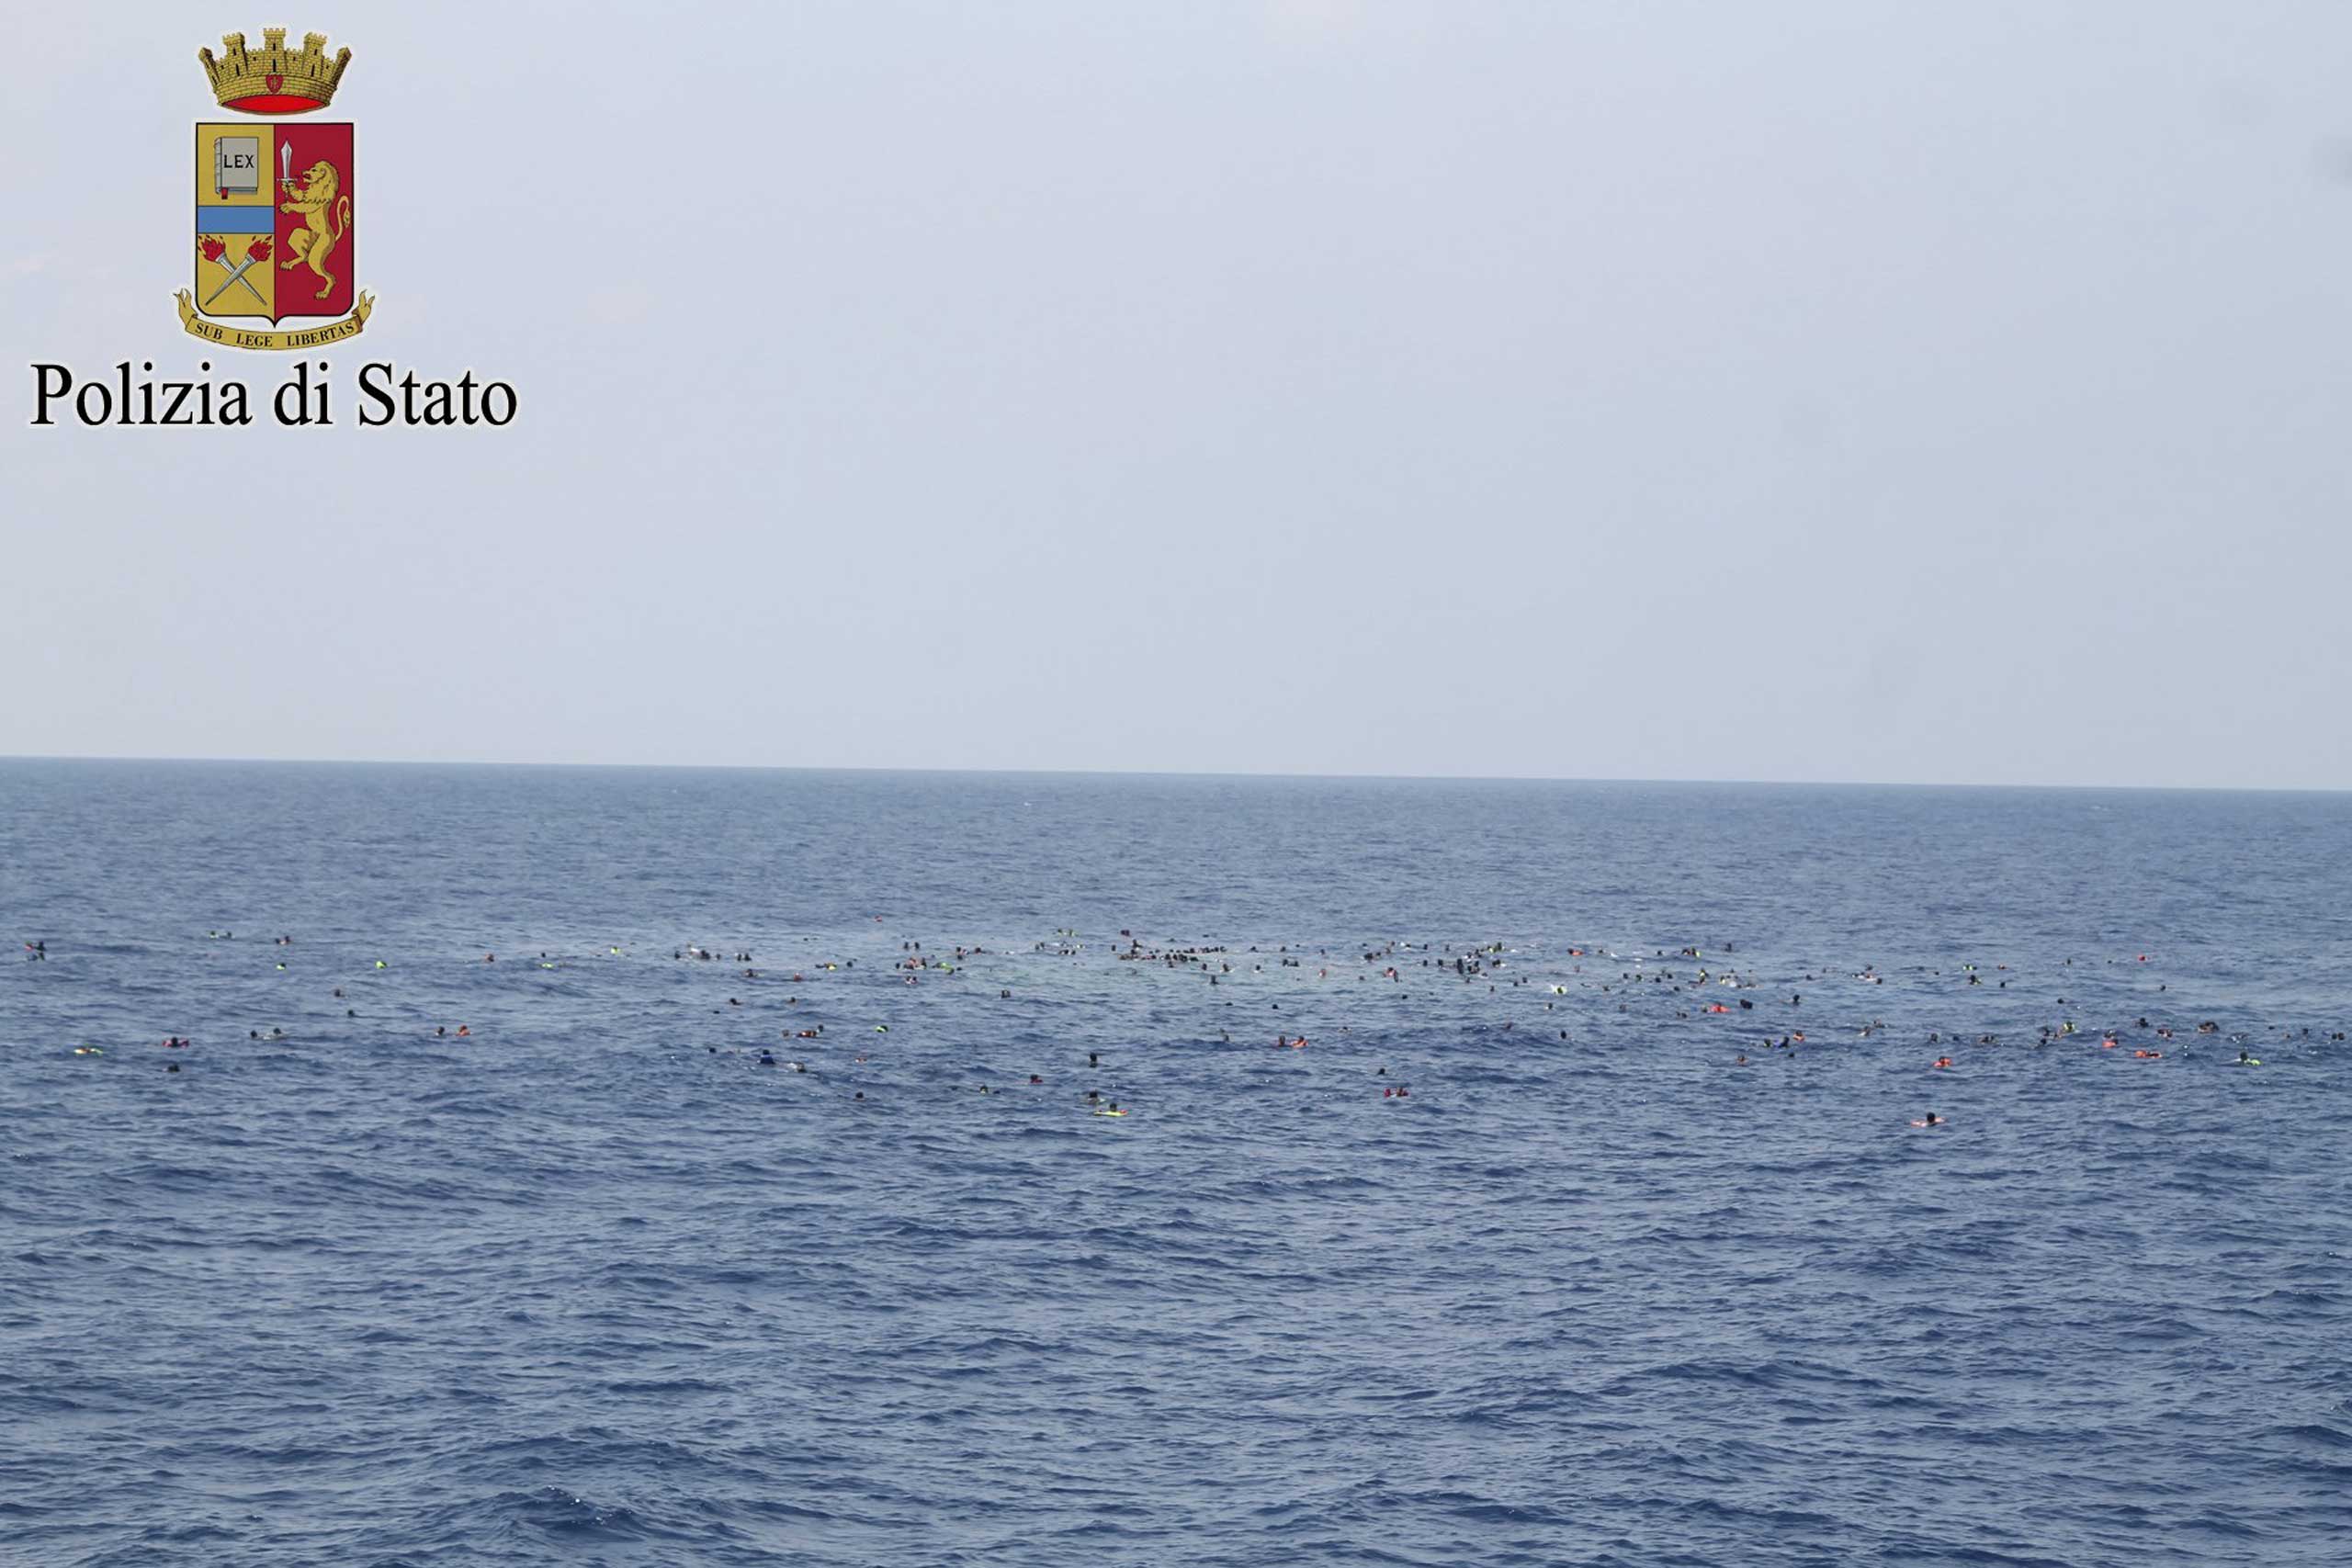 Surviving migrants are seen swimming in the area where their wooden boat capsized and sank off the coast of Libya on Aug. 5, 2015. (Italian Police/Reuters)